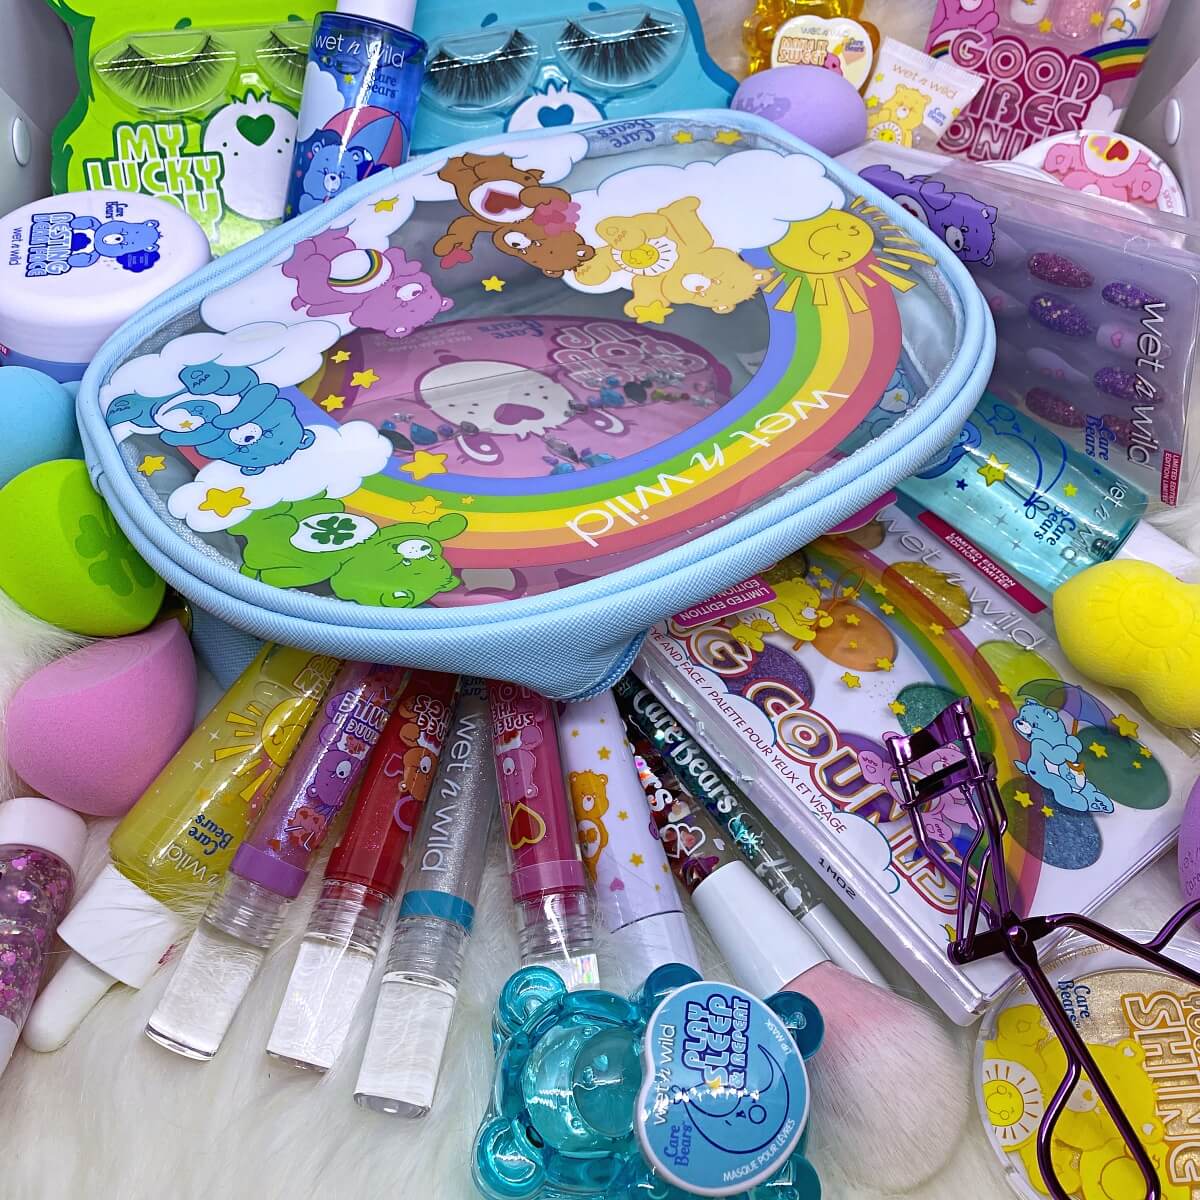 wet n wild Care Bears Collection Review